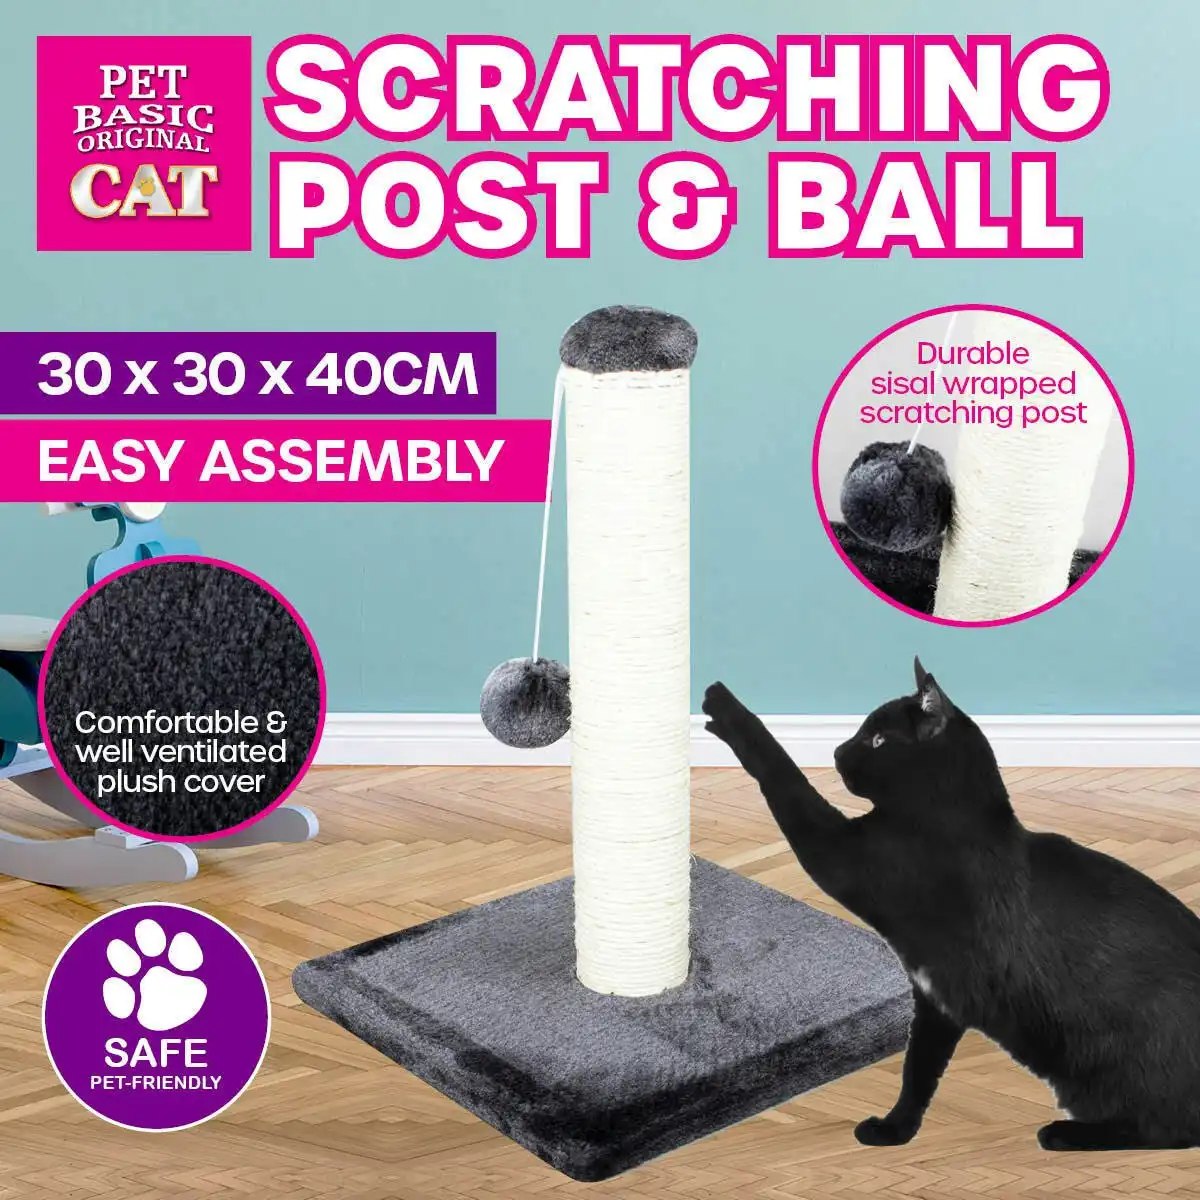 Pet Basic Cat Scratching Post & Ball Fun Play Scratch Easy Assembly 30 x 40cm